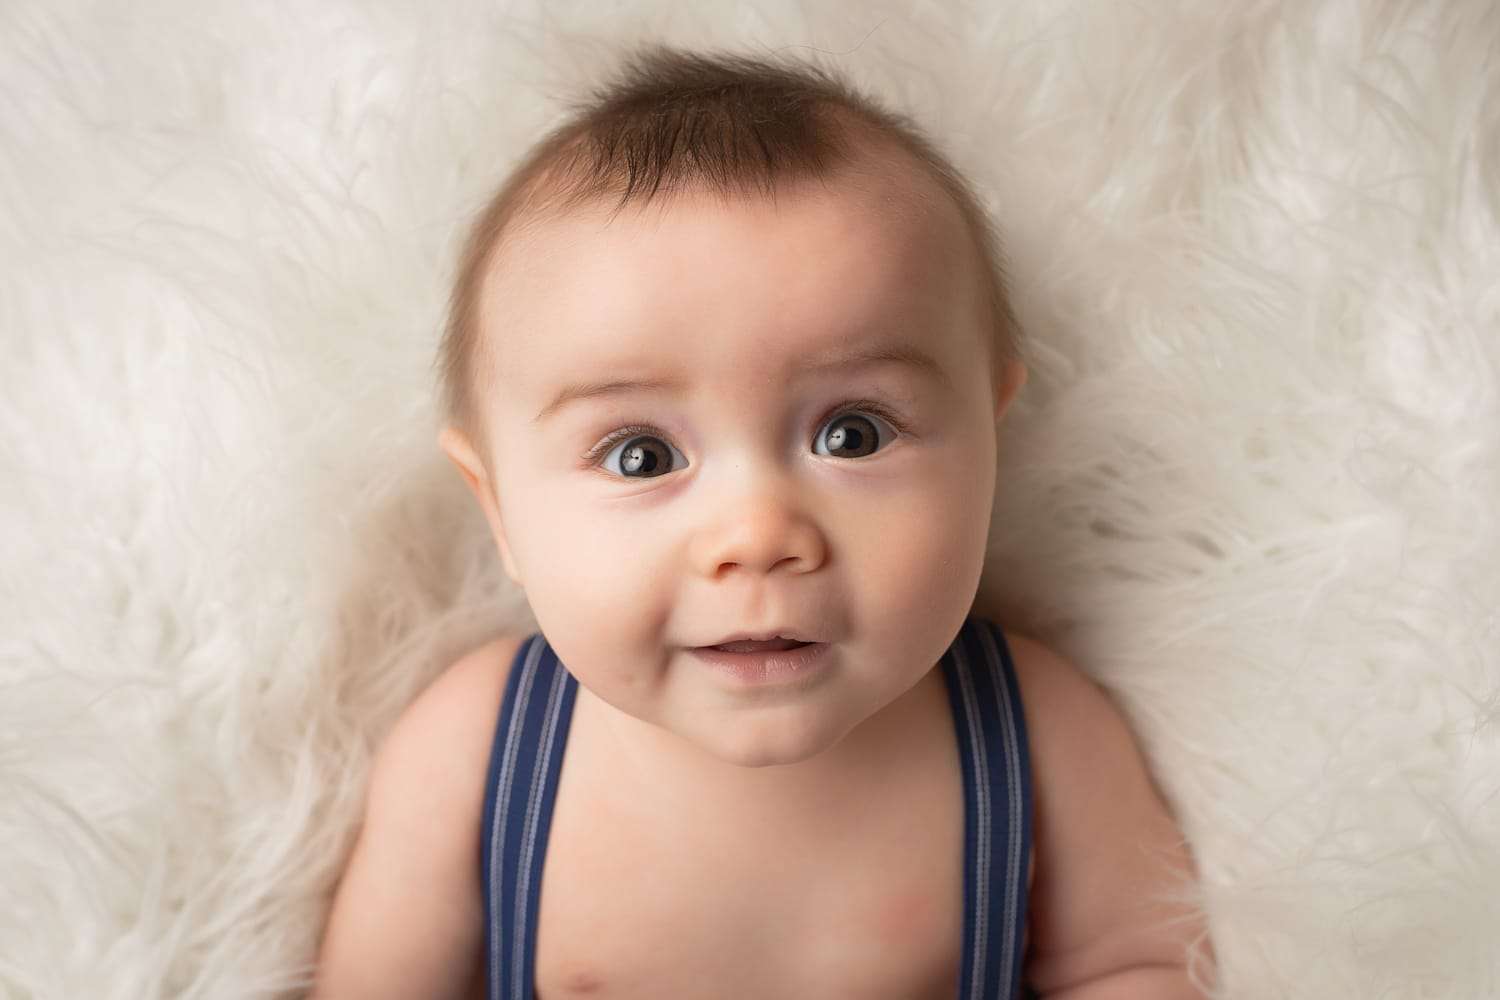 baby photographer in rochester ny captures 4 month old baby boy